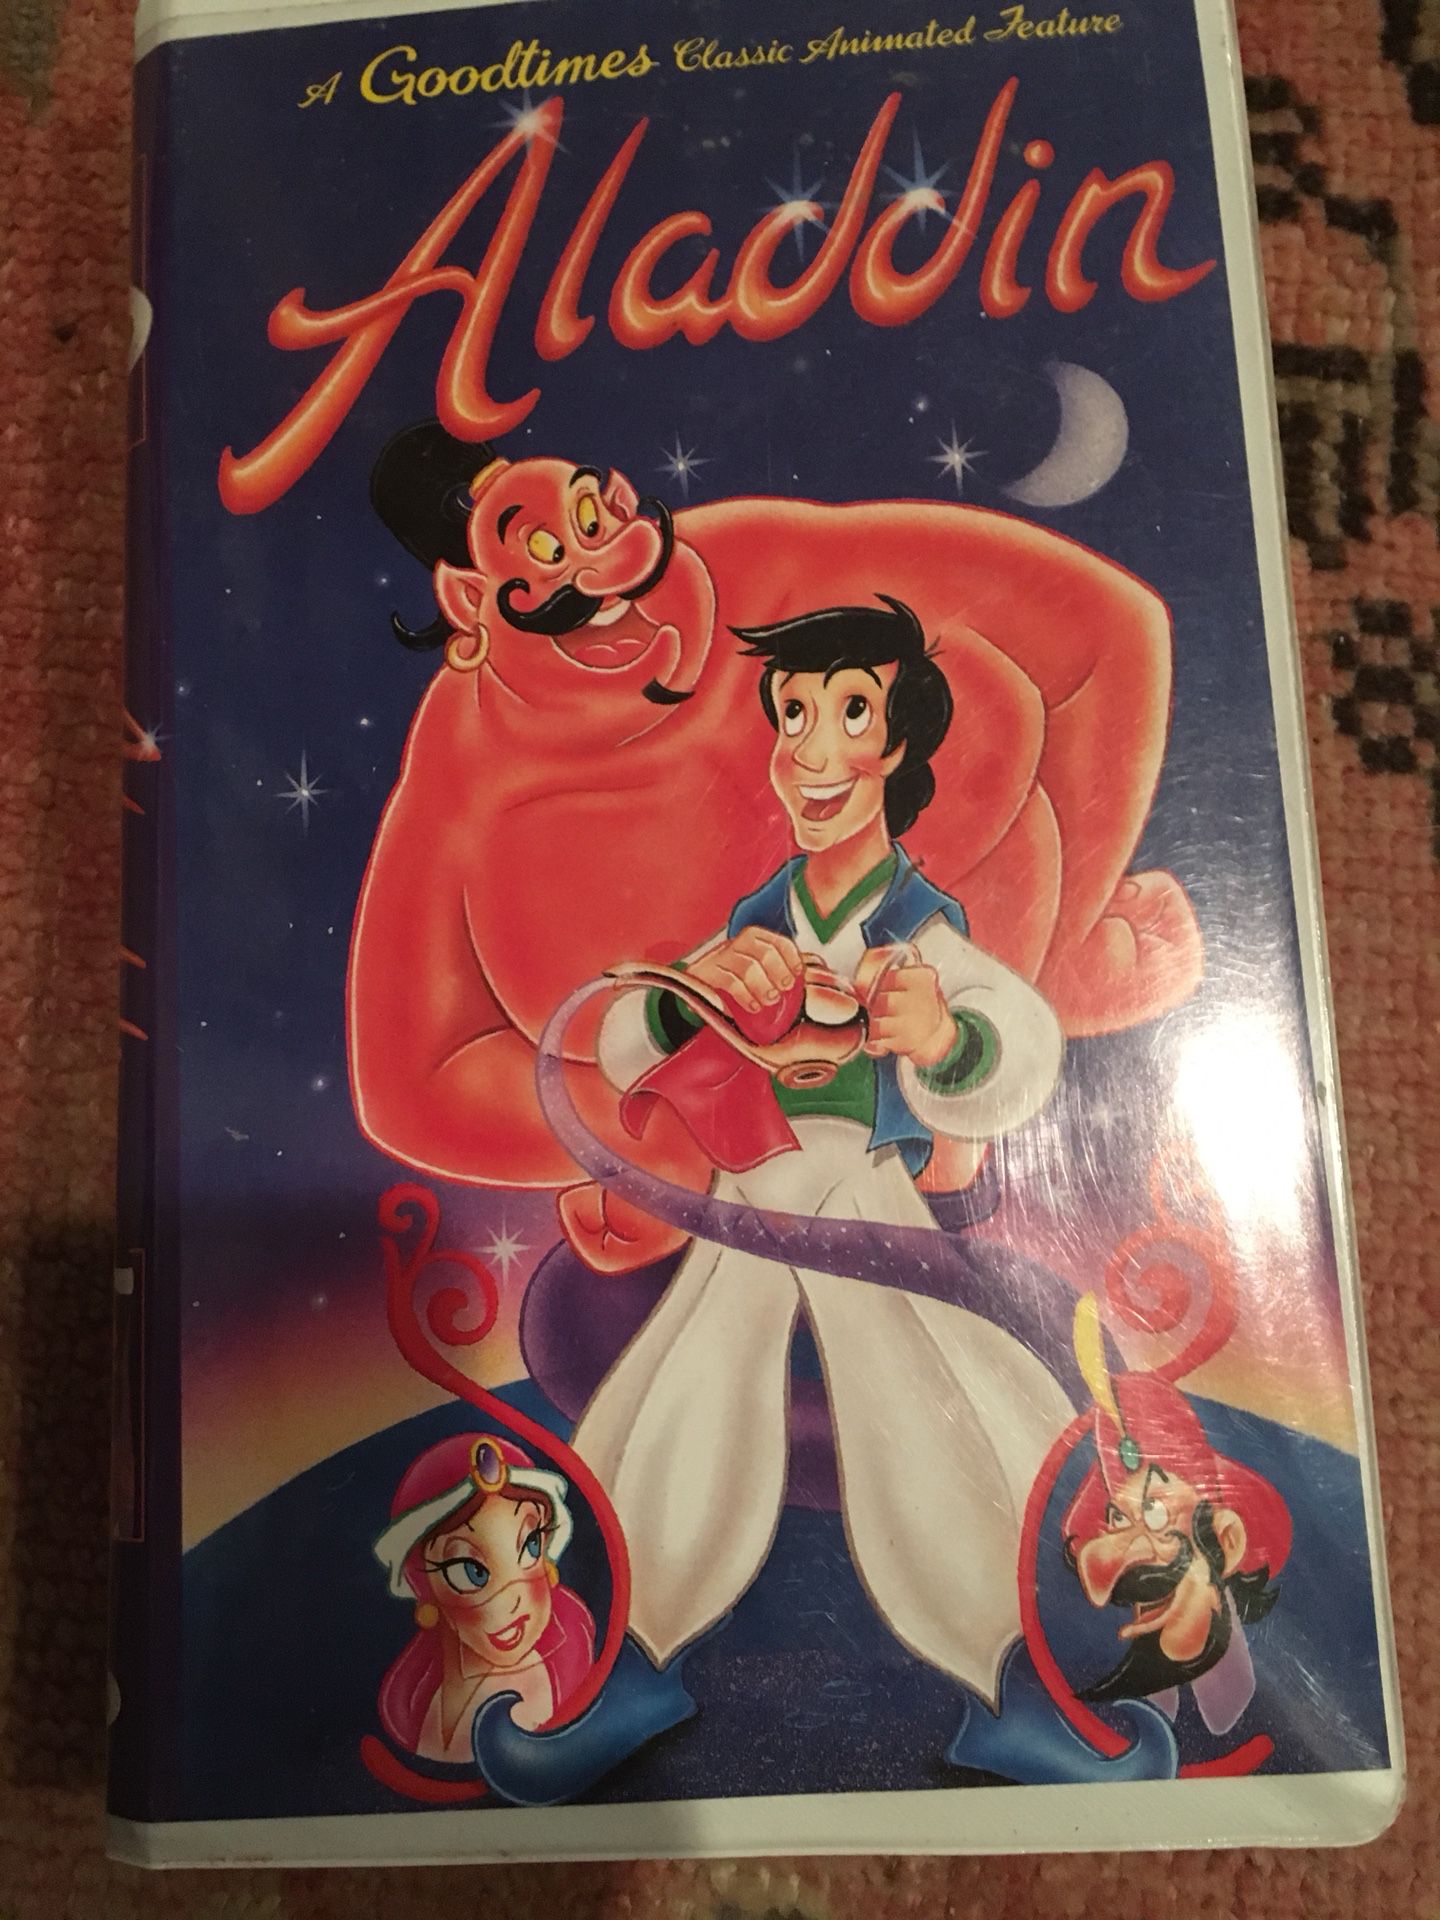 Aladdin on VHS collector’s addition